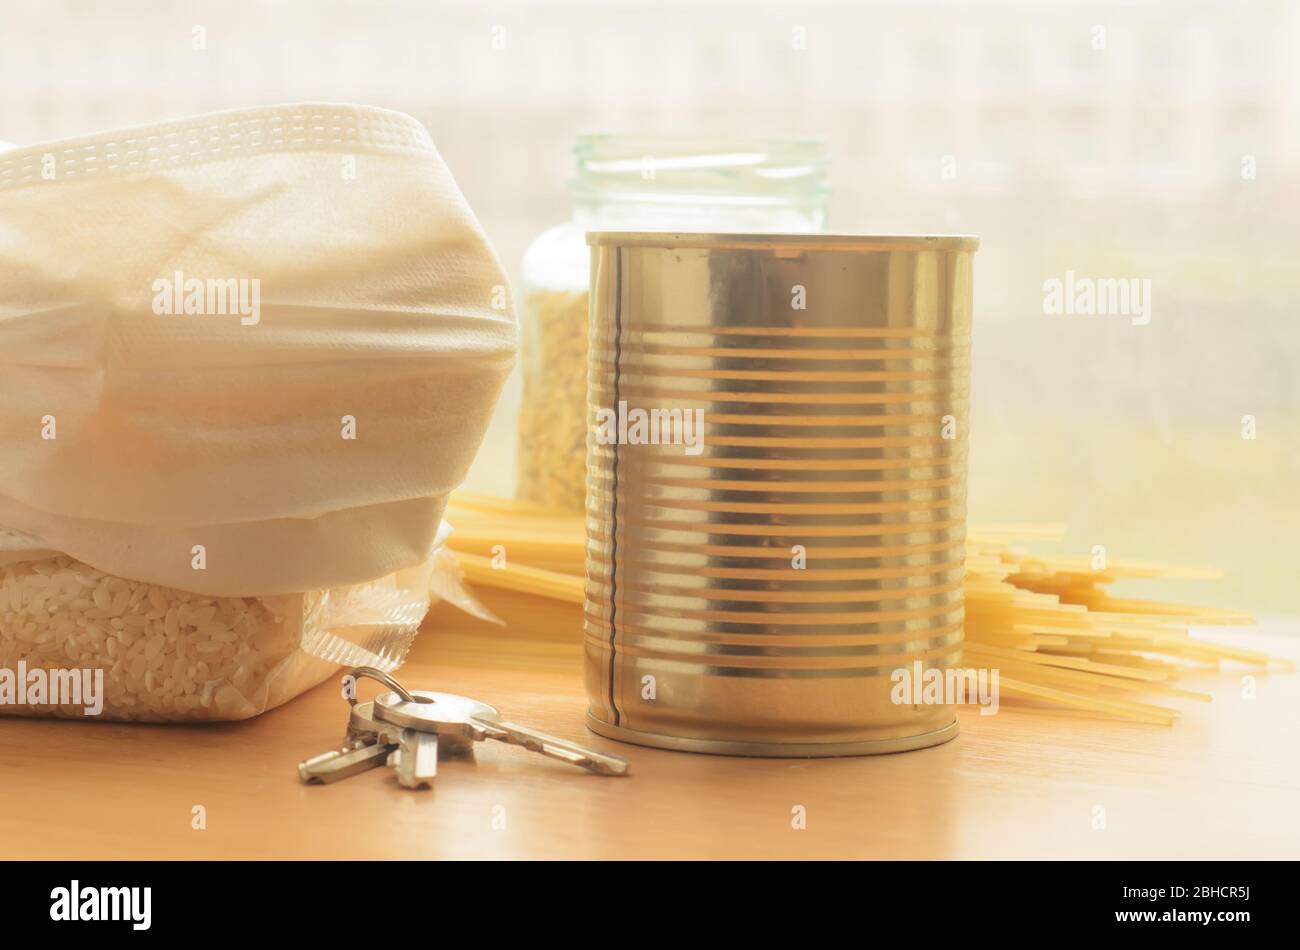 Coronavirus food.Foods for quarantine on wooden background by the window. Stock Photo